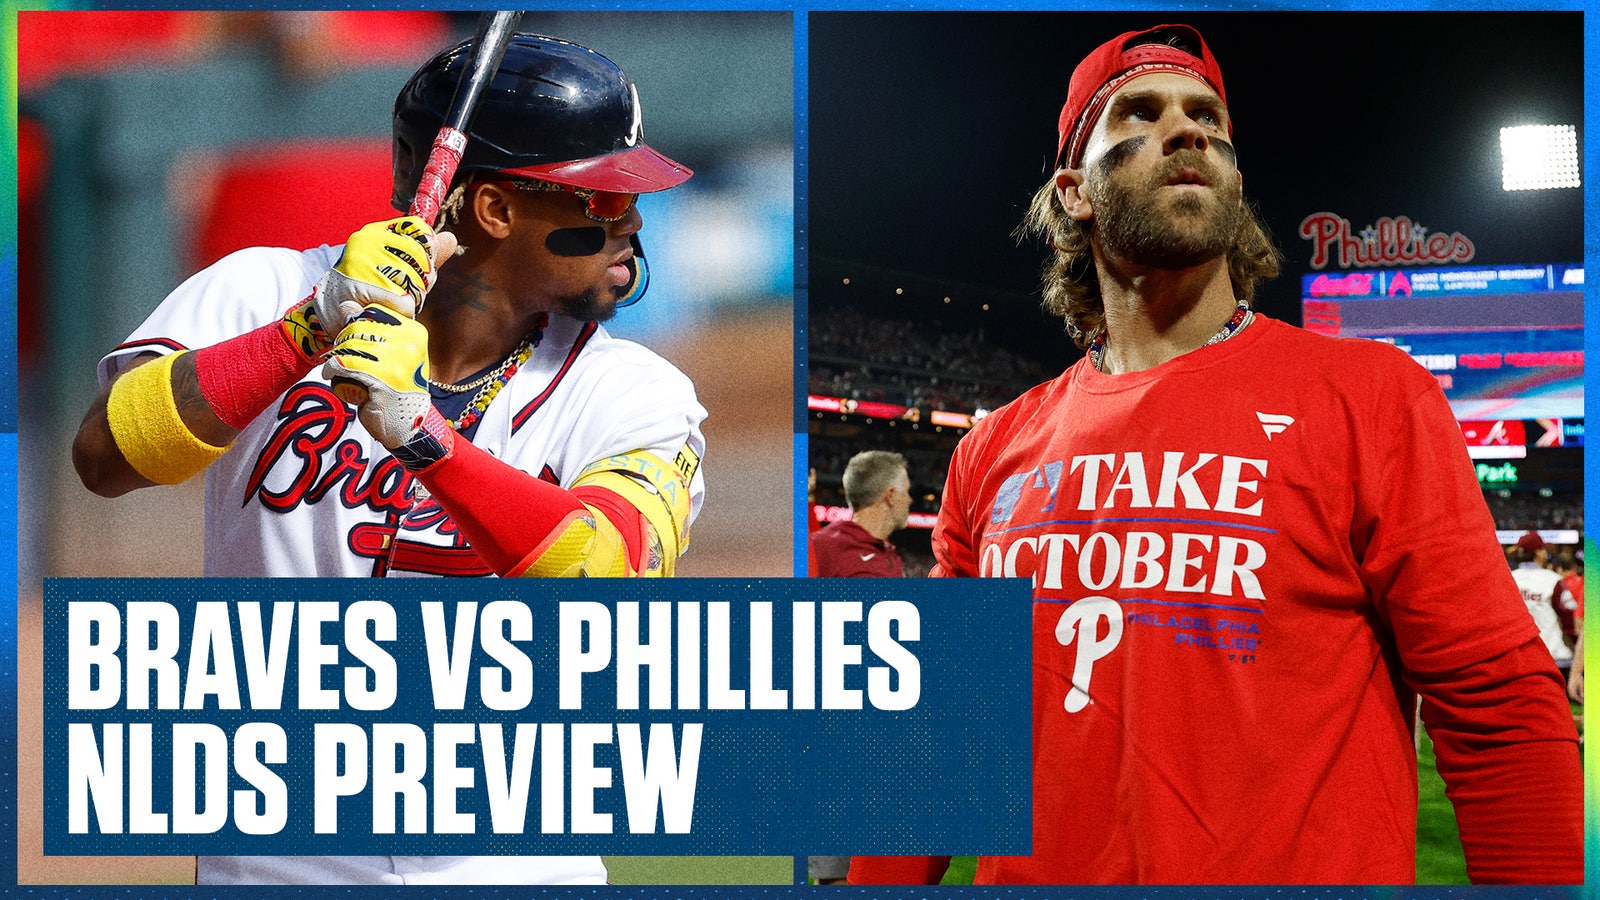 Braves vs Phillies NLDS Preview: Will history repeat itself?